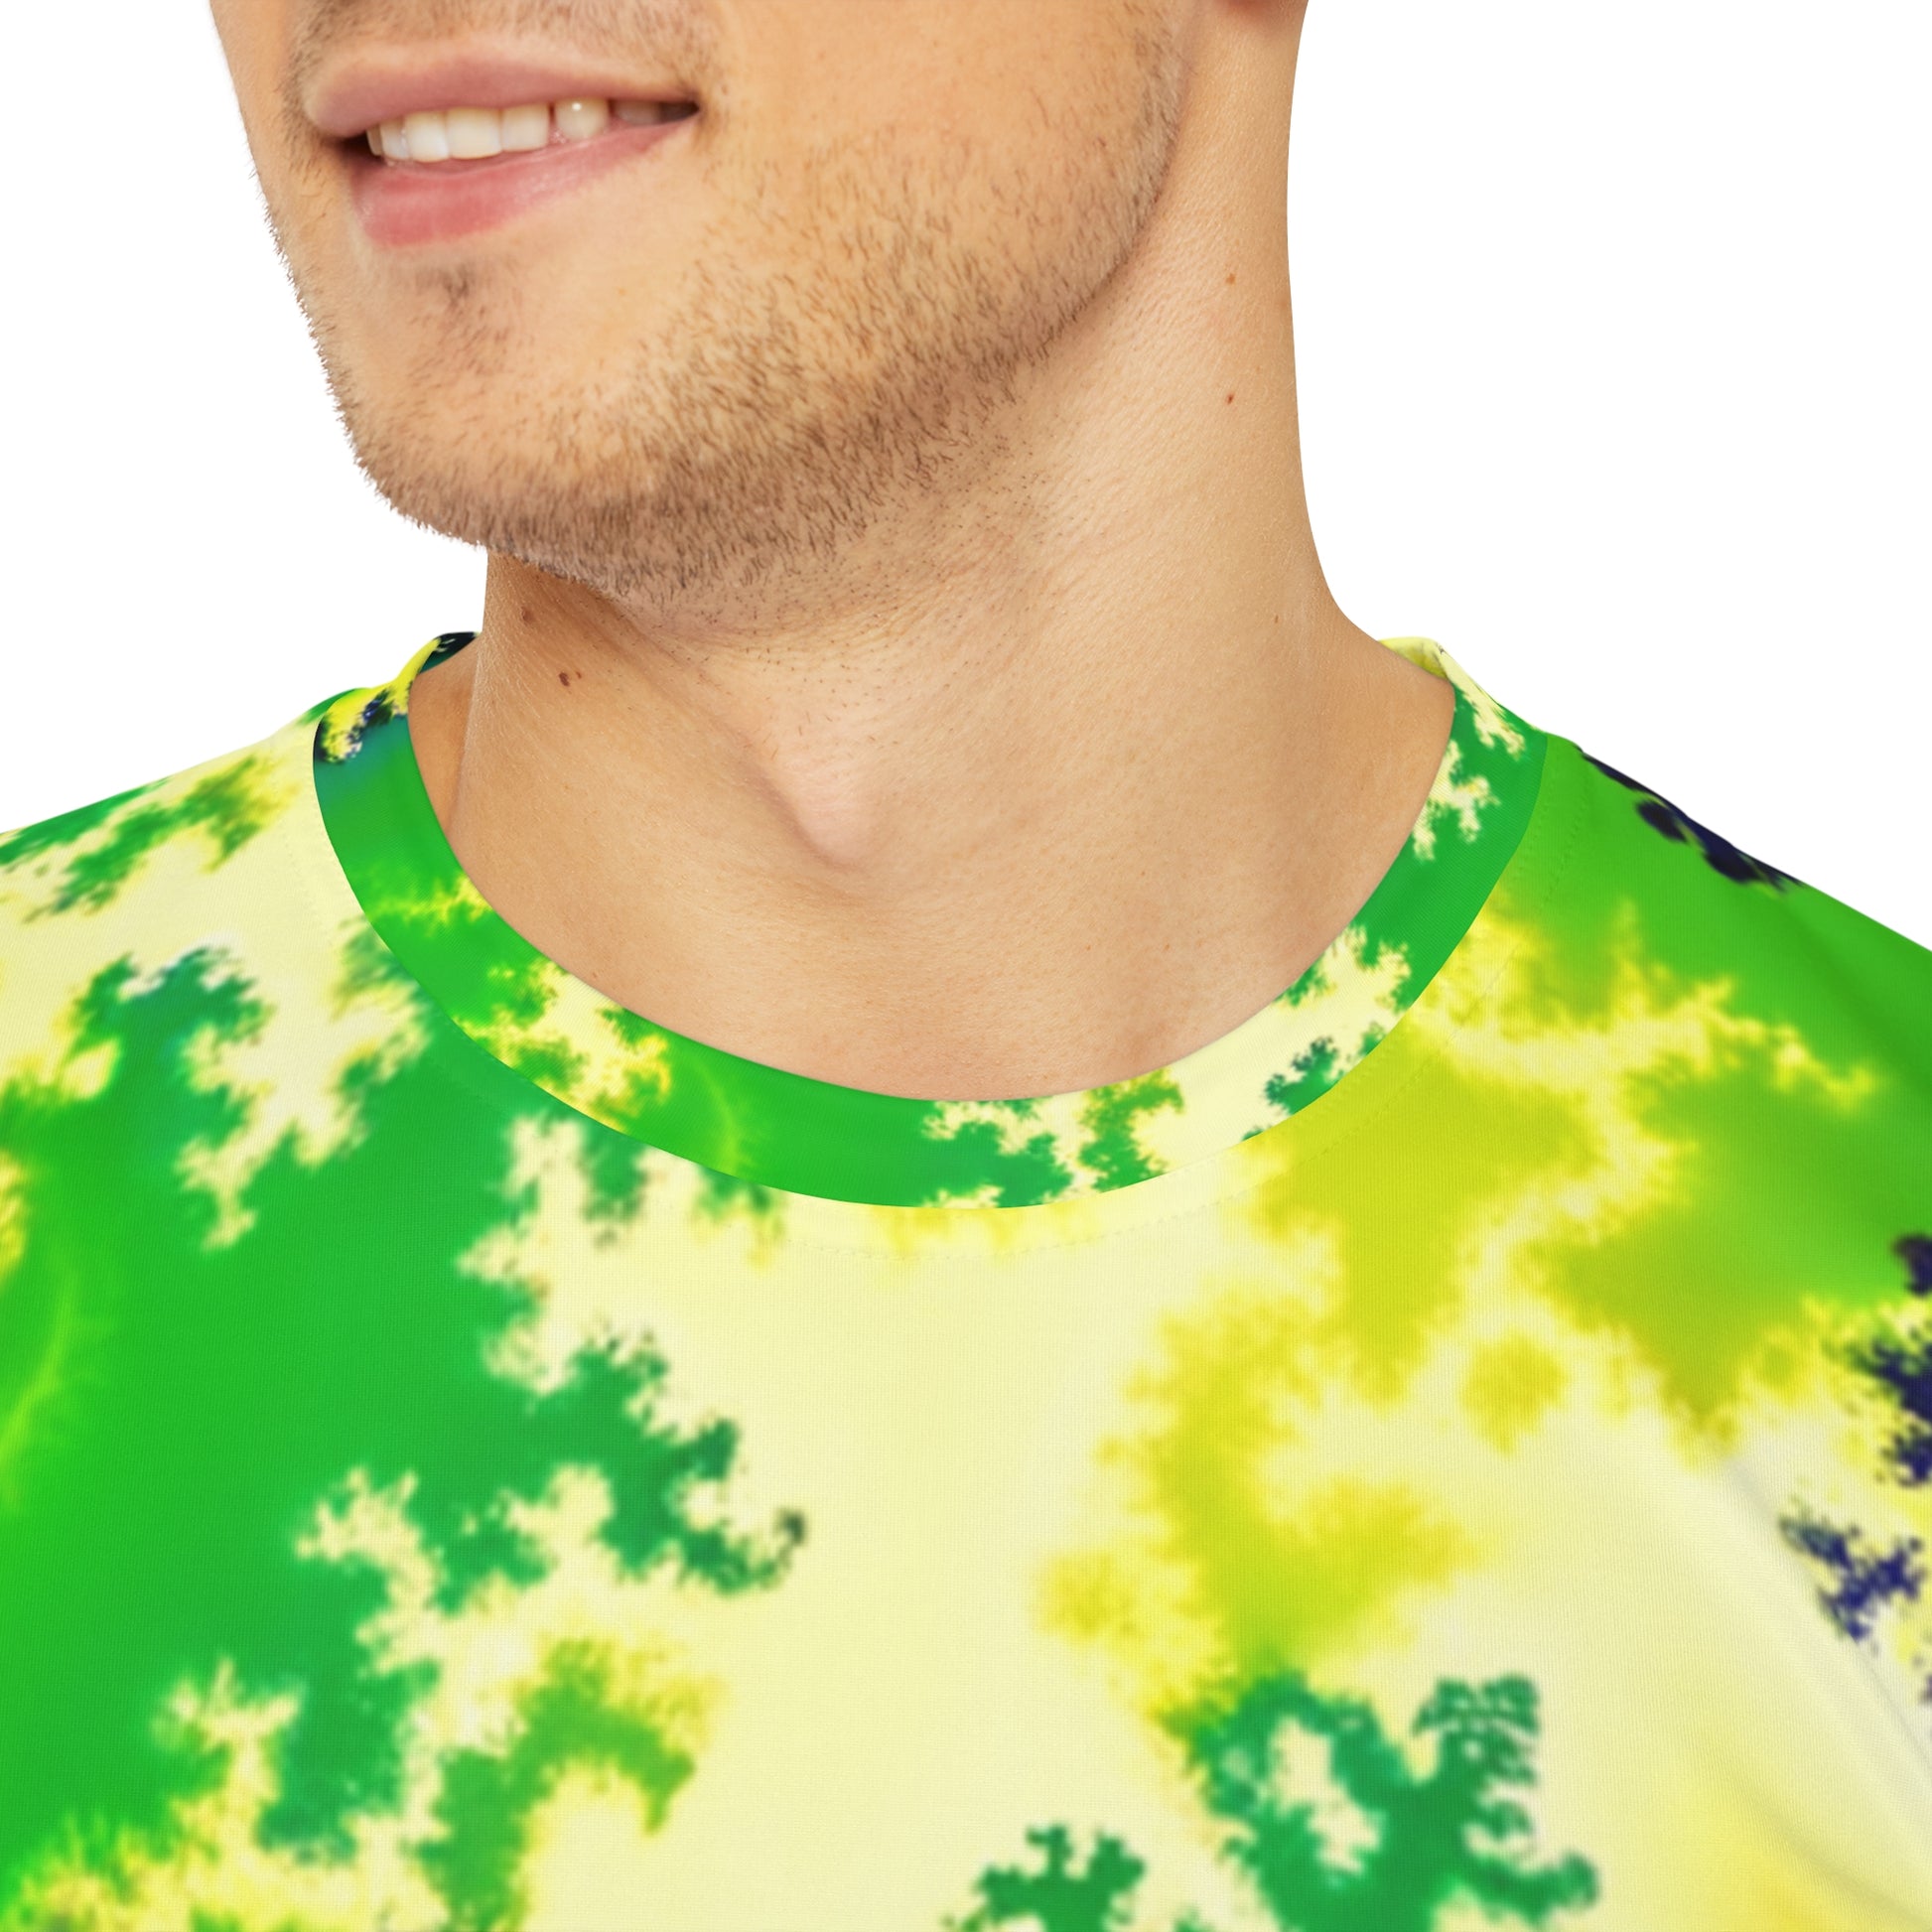 Close-up shot of the Psychedelic Serpentine Fractal Fusion Crewneck Pullover All-Over Print Short-Sleeved Shirt green yellow blue black psychedelic pattern worn by a white man